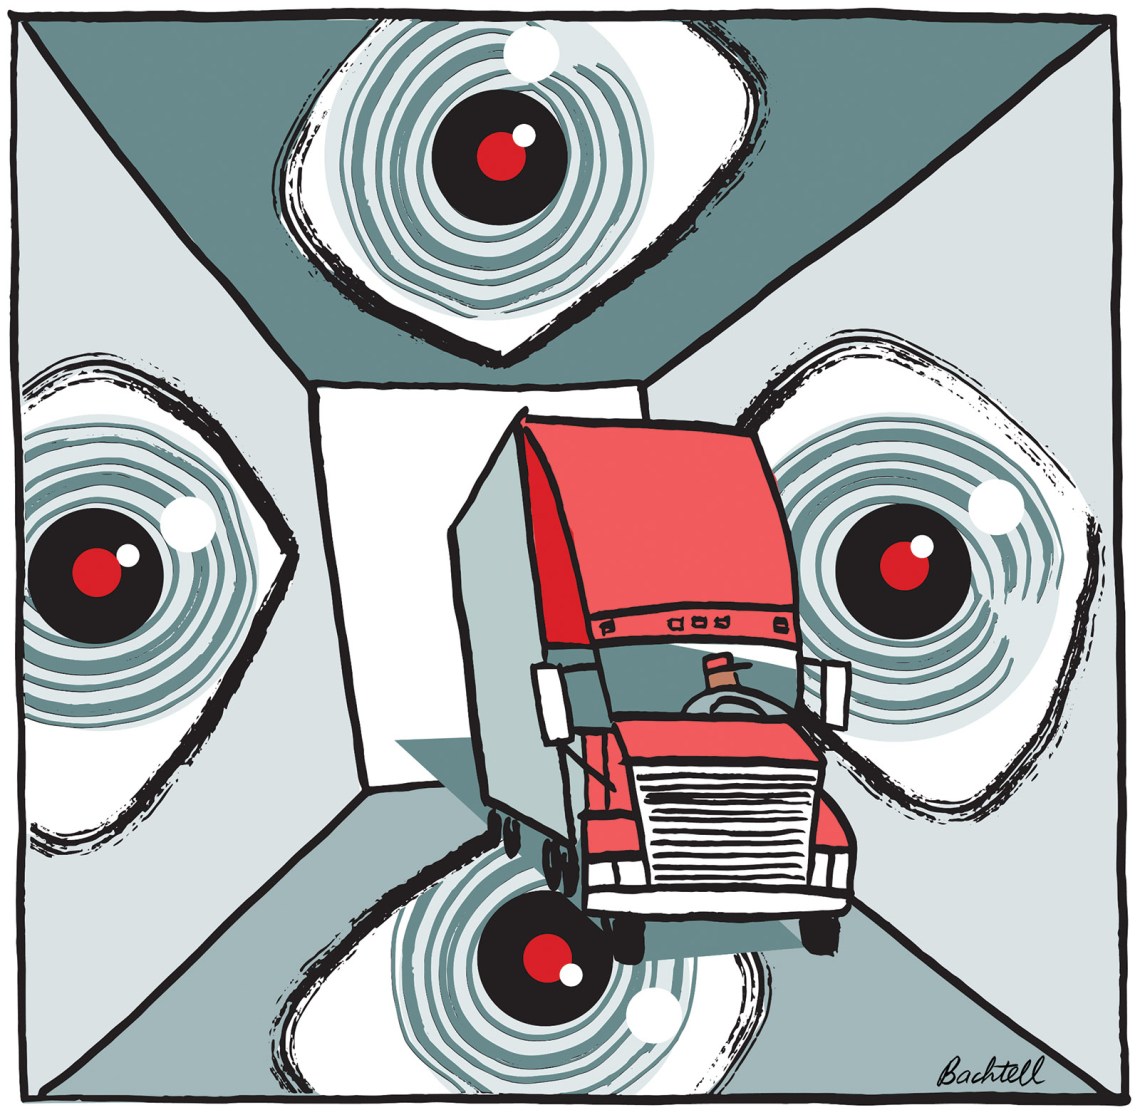 Large eyes gazing at a truck